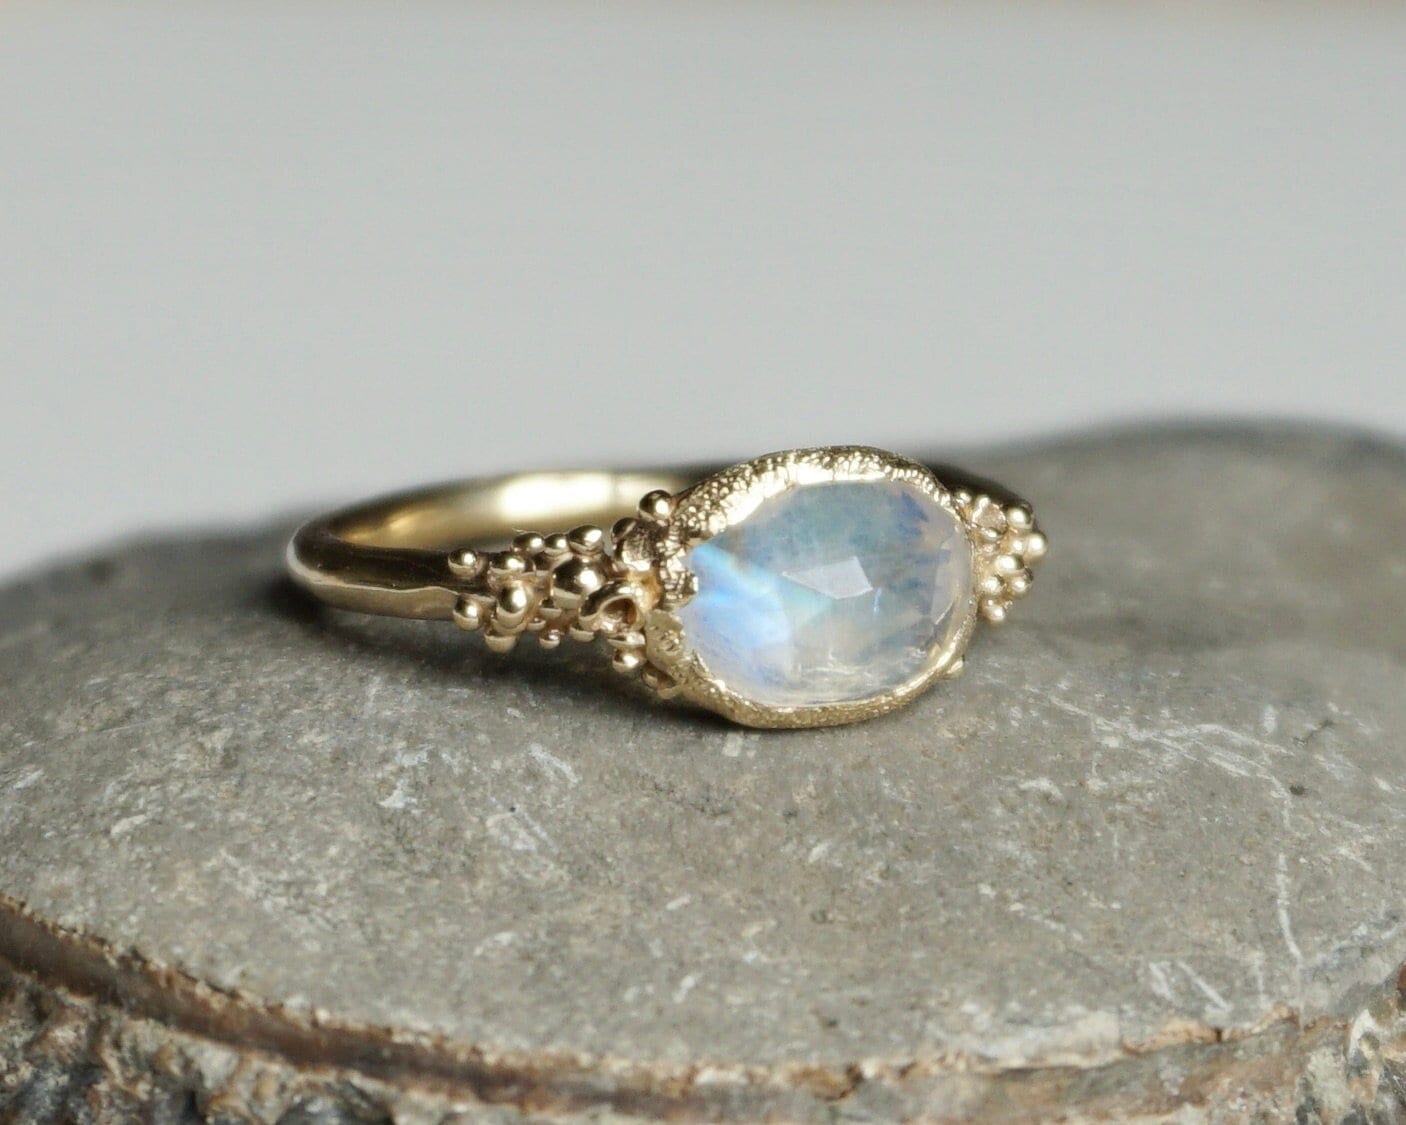 Mystical Moonstone Ring | Engagement Recycled Gold Rose Cut Rustic Organic